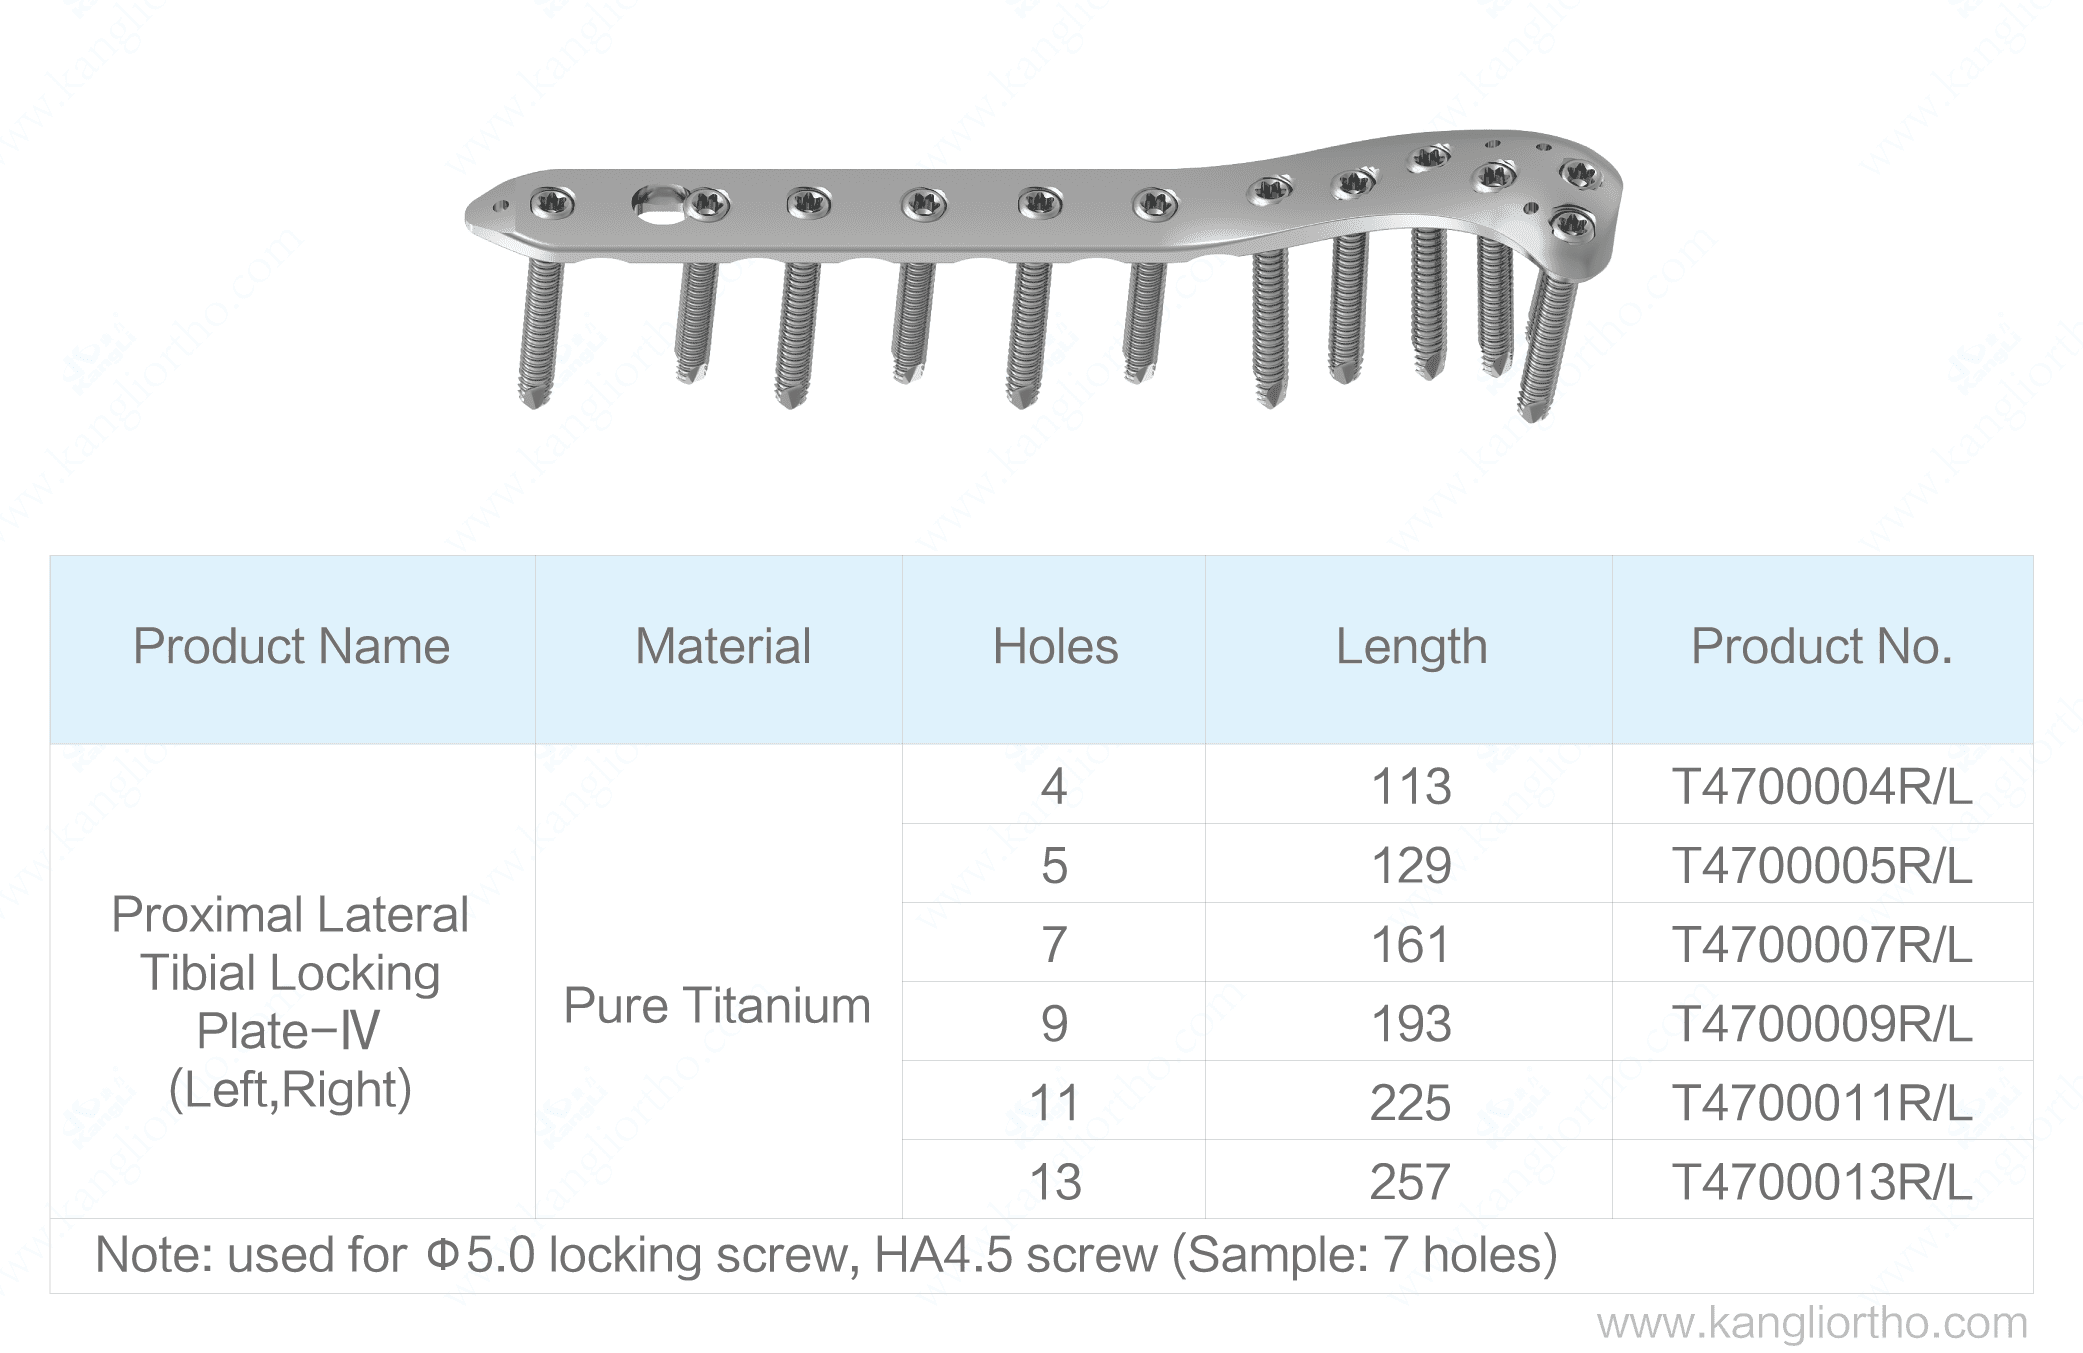 proximal-lateral-tibial-locking-plate-iv-specifications